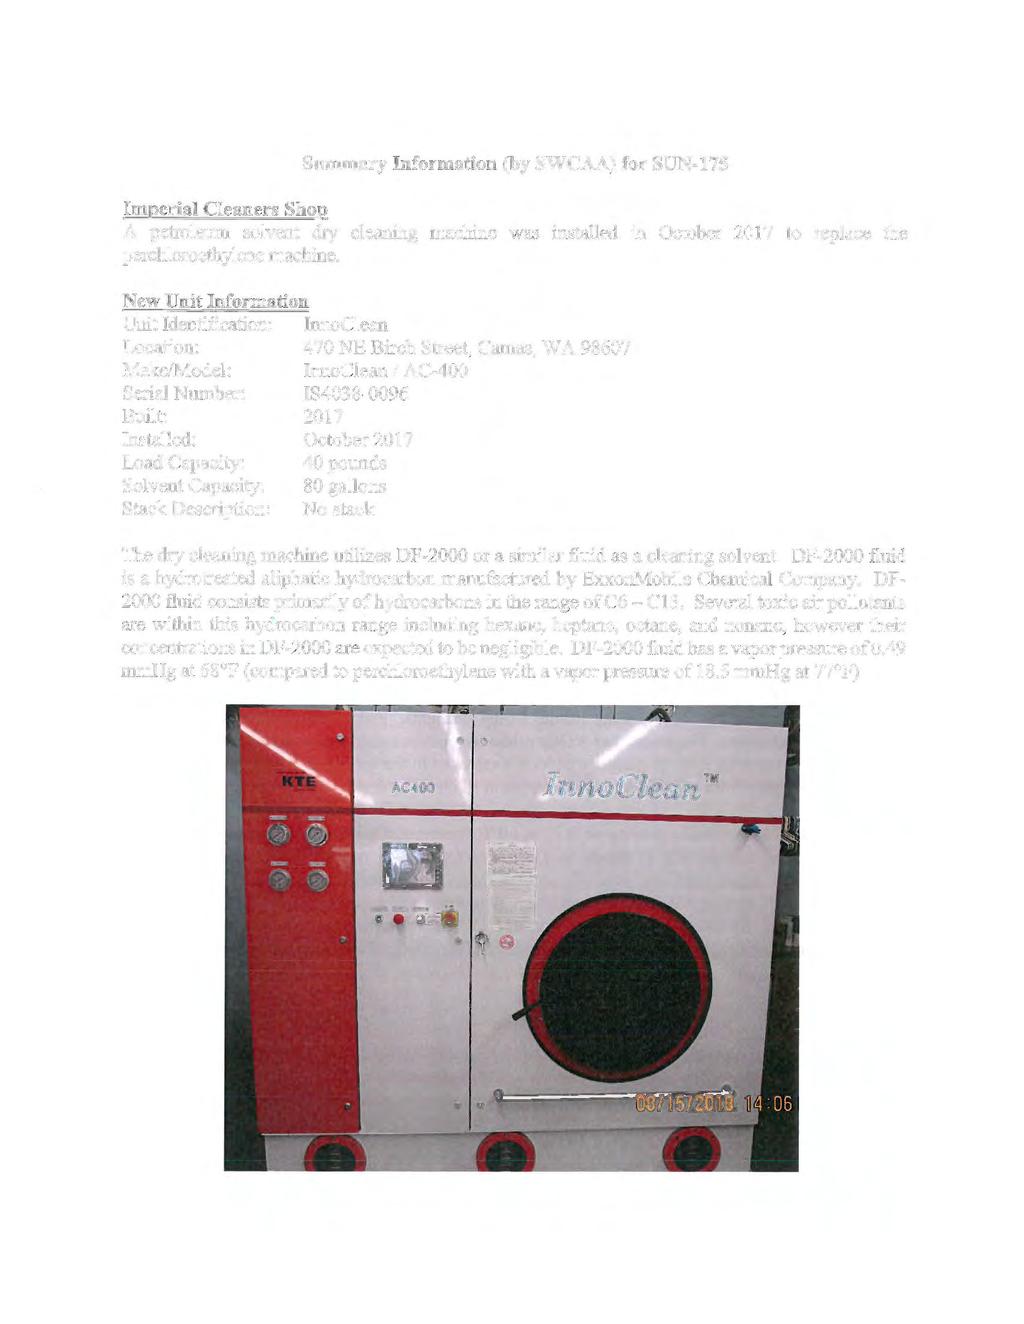 Summary Information (by SWCAA) for SUN-175 Imperial Cleaners Shop A petroleum solvent dry cleaning machine was installed m October 2017 to replace the perchloroethylene